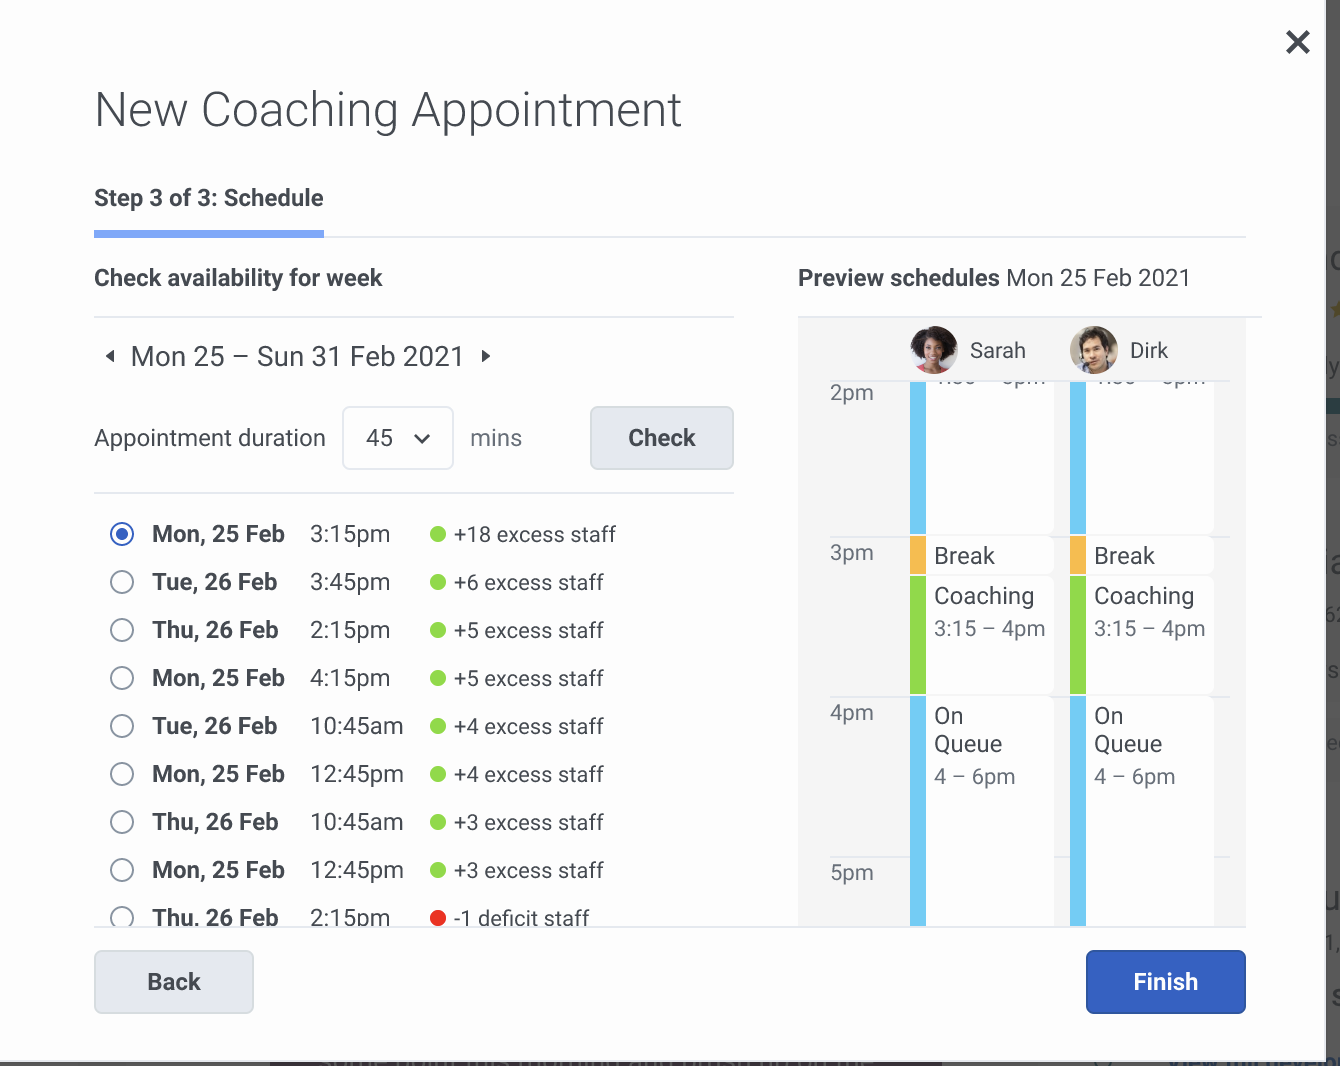 Schedule a coaching appointment - Genesys Cloud Resource Center